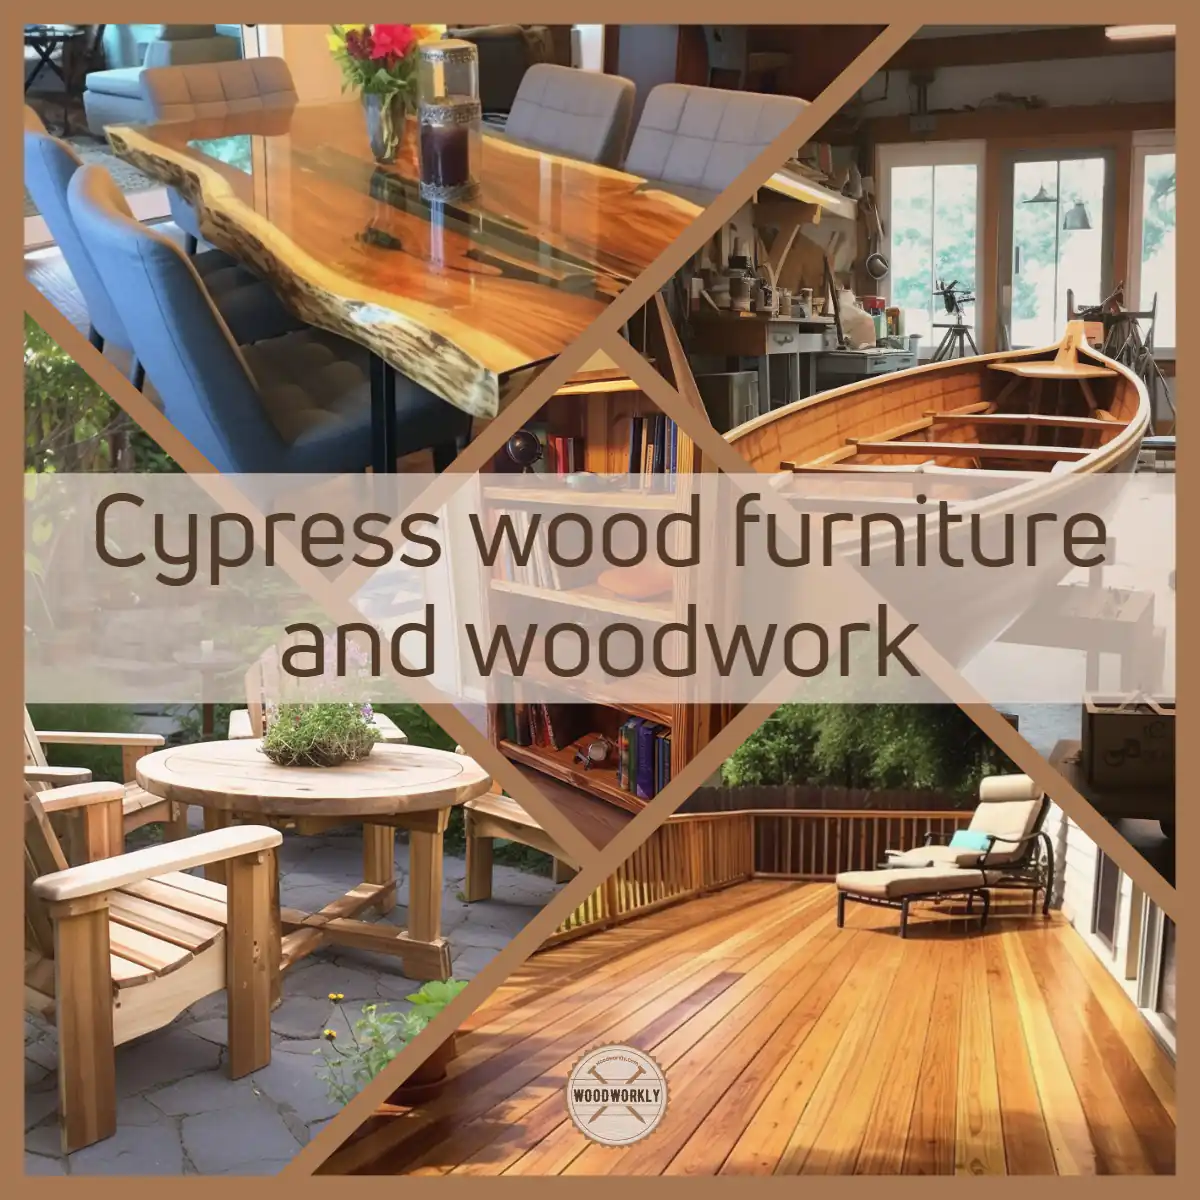 Cypress wood furniture and woodwork